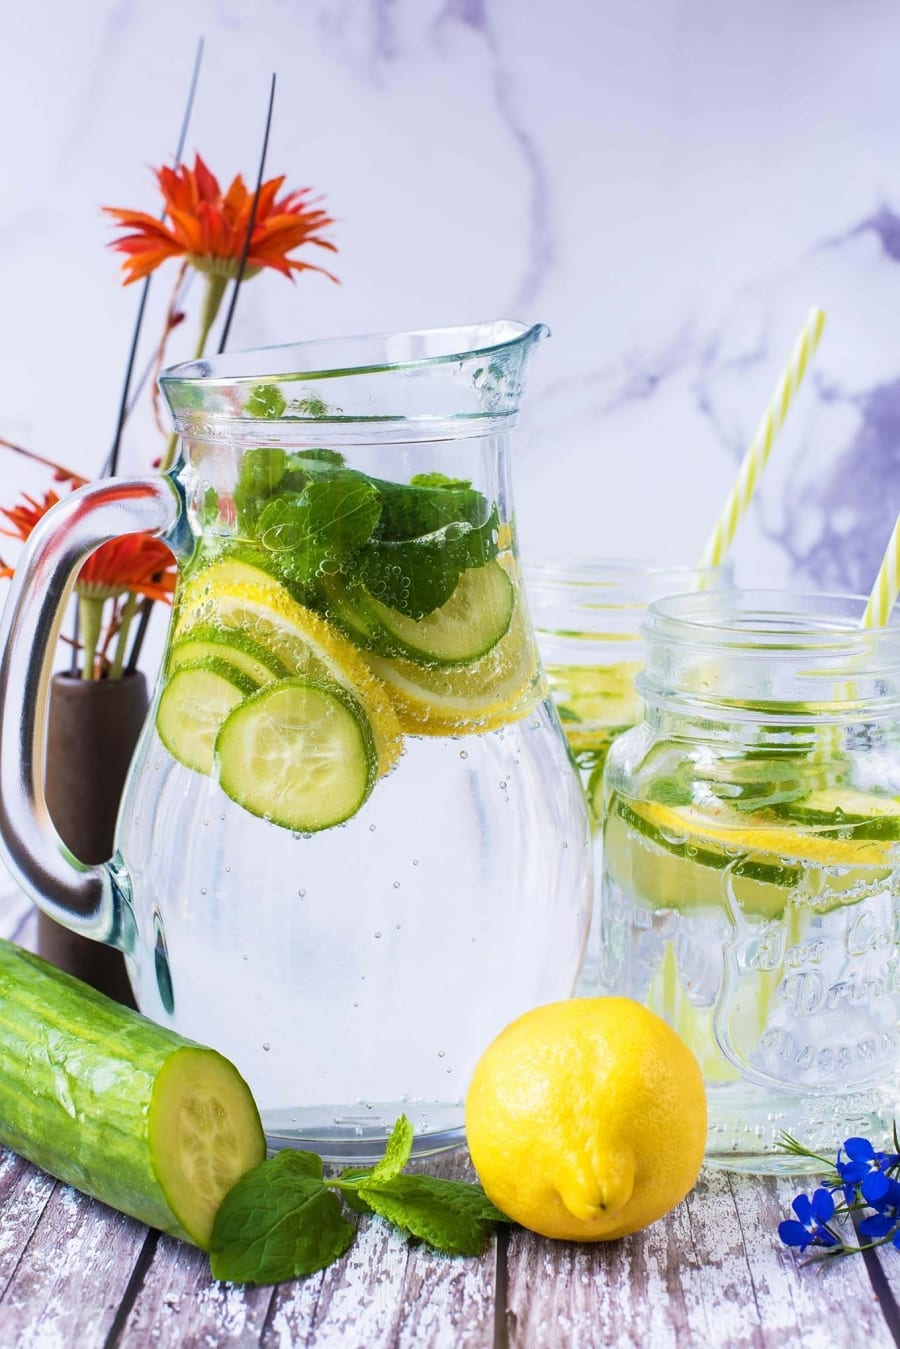 A large glass jug of water with slices of cucumber and lemon in it.